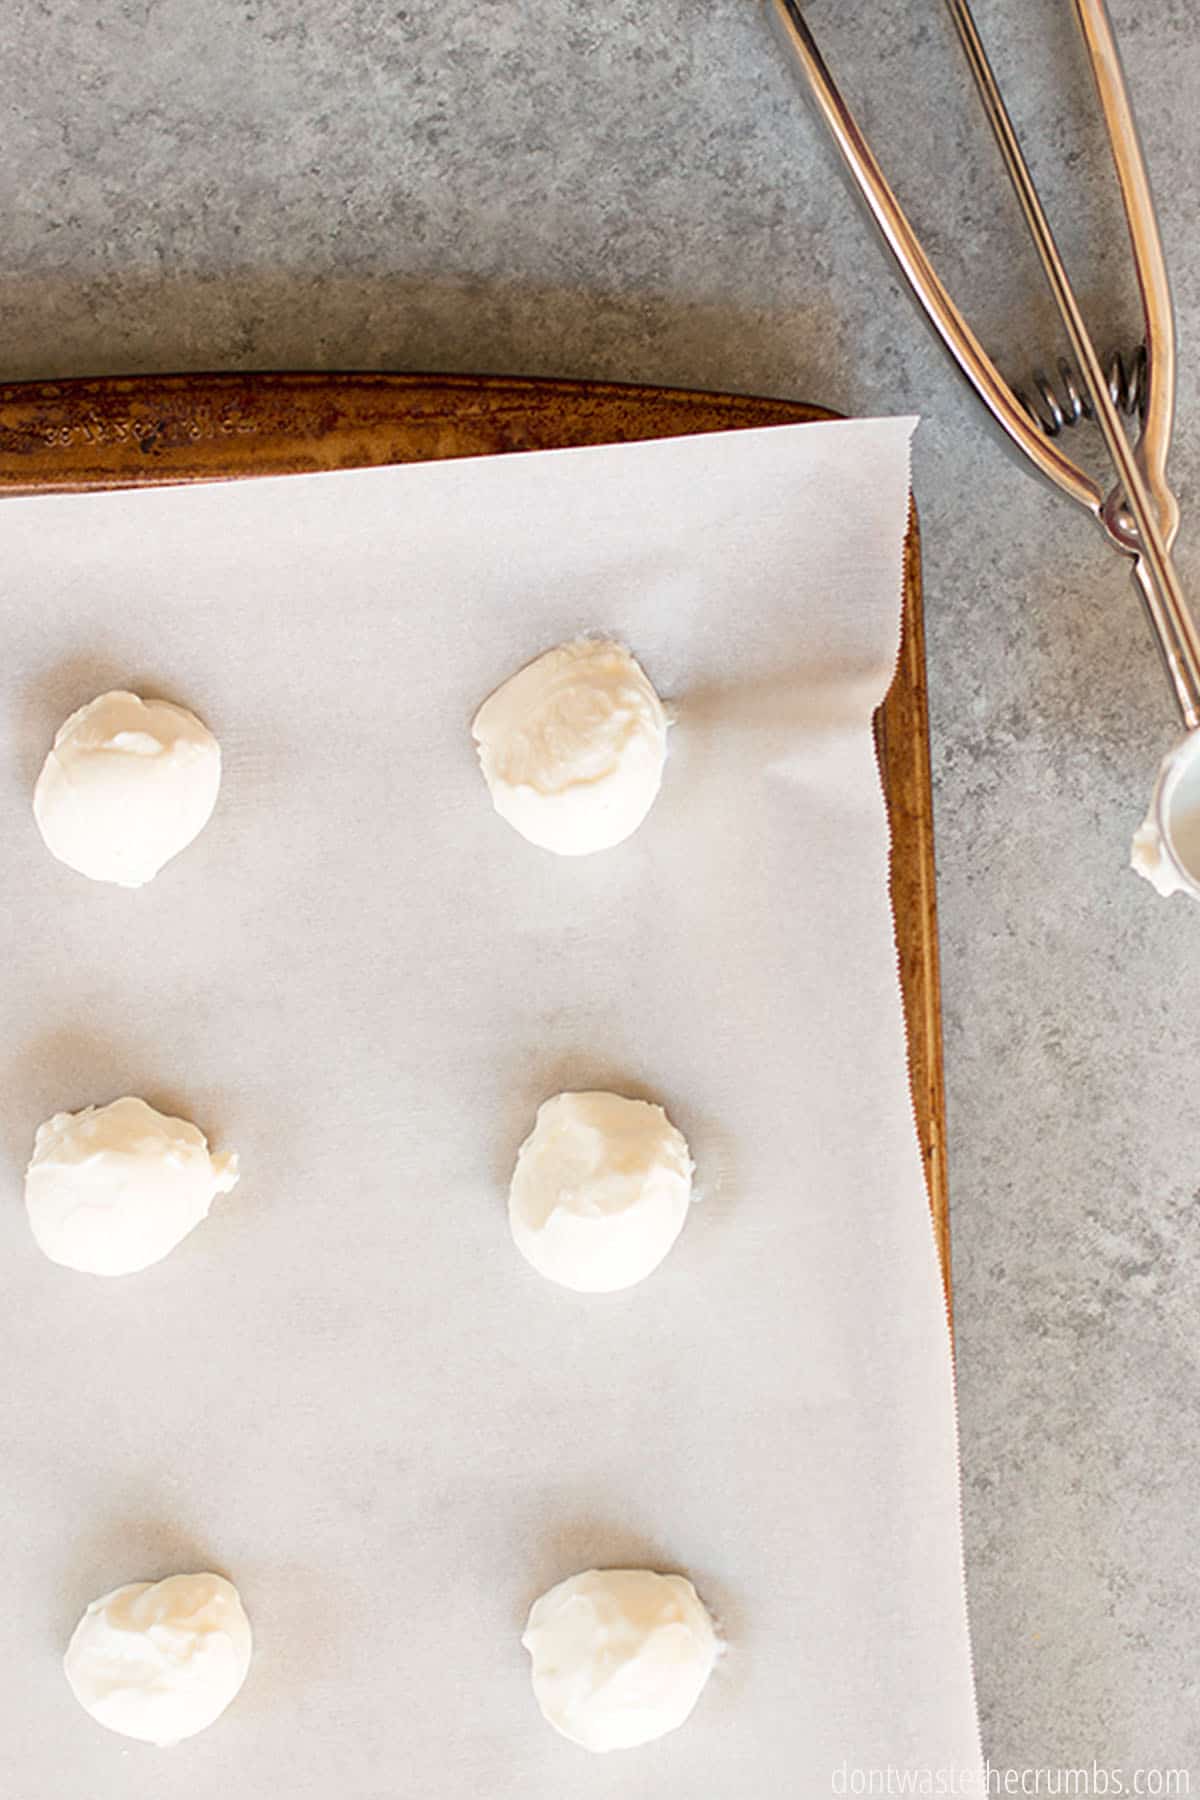 Six freshly scooped balls of yogurt ready to be frozen on a sheet pan with a piece of parchment paper. There is a yogurt scoop beside the sheet pan.